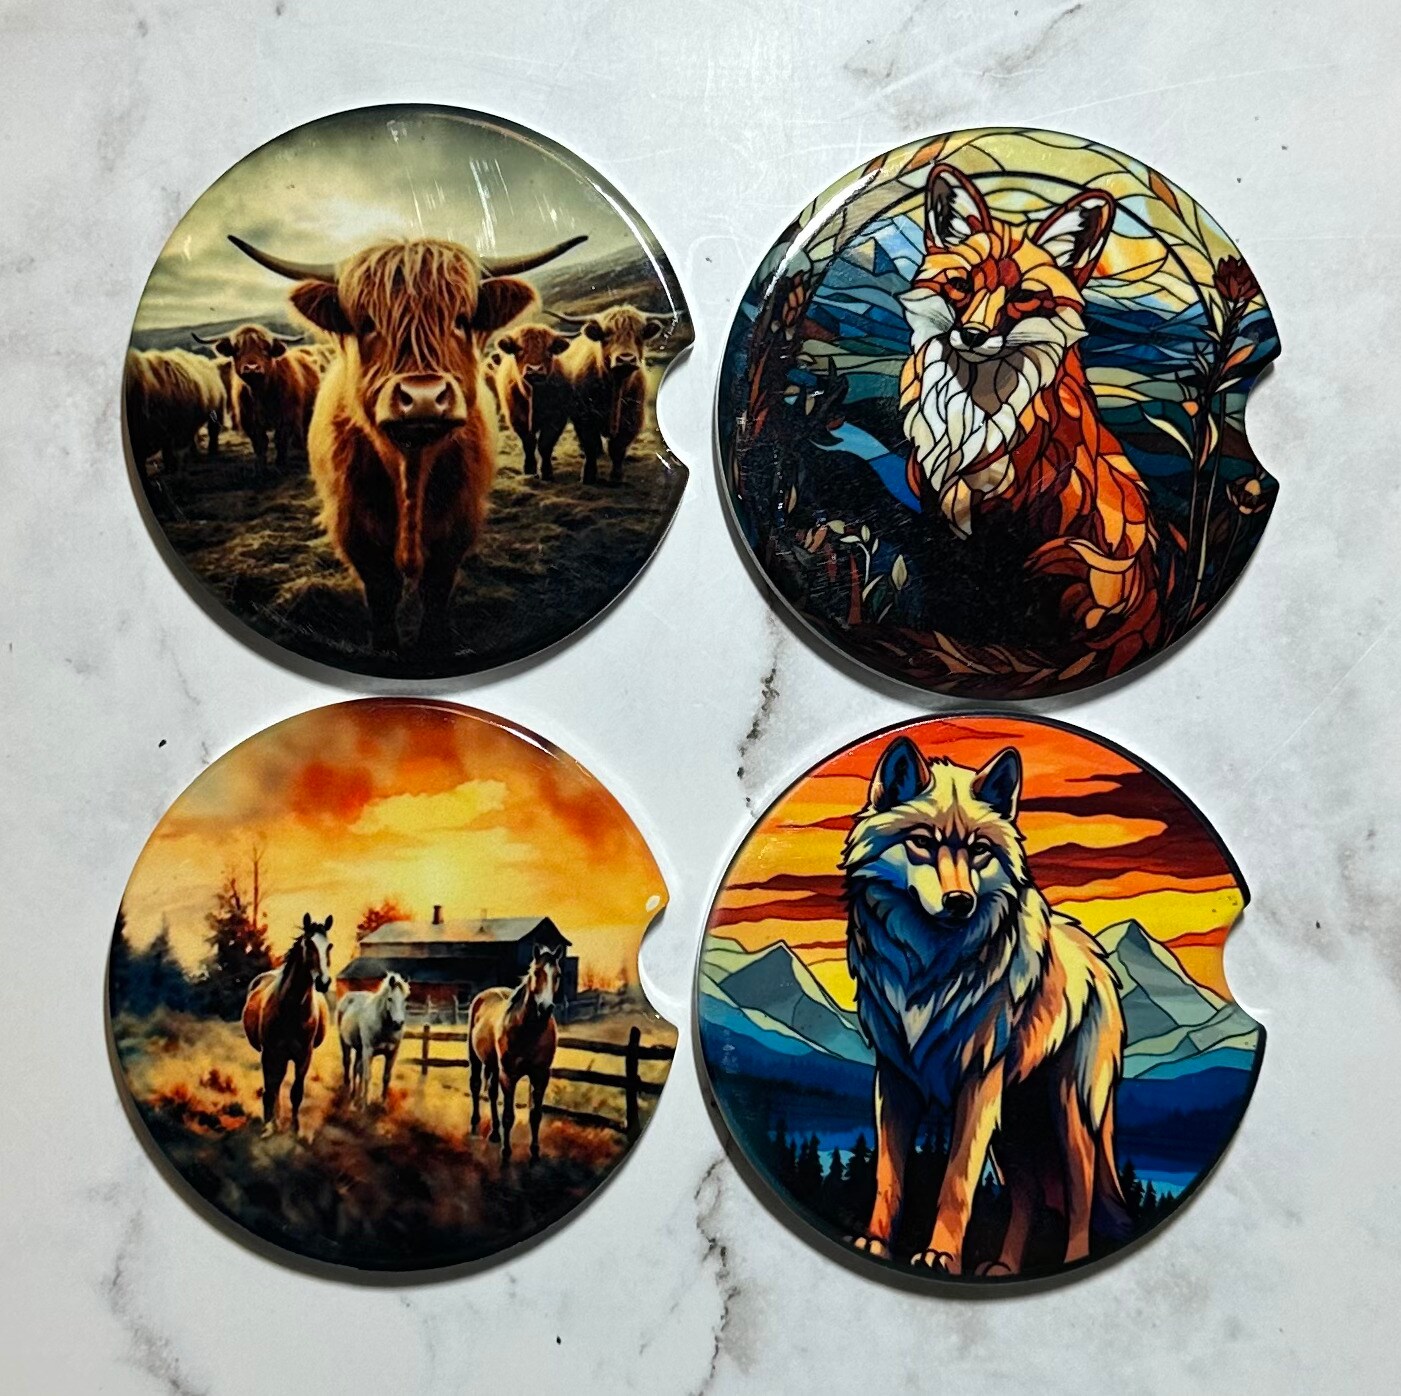 Animal Car Coasters for Cup Holders